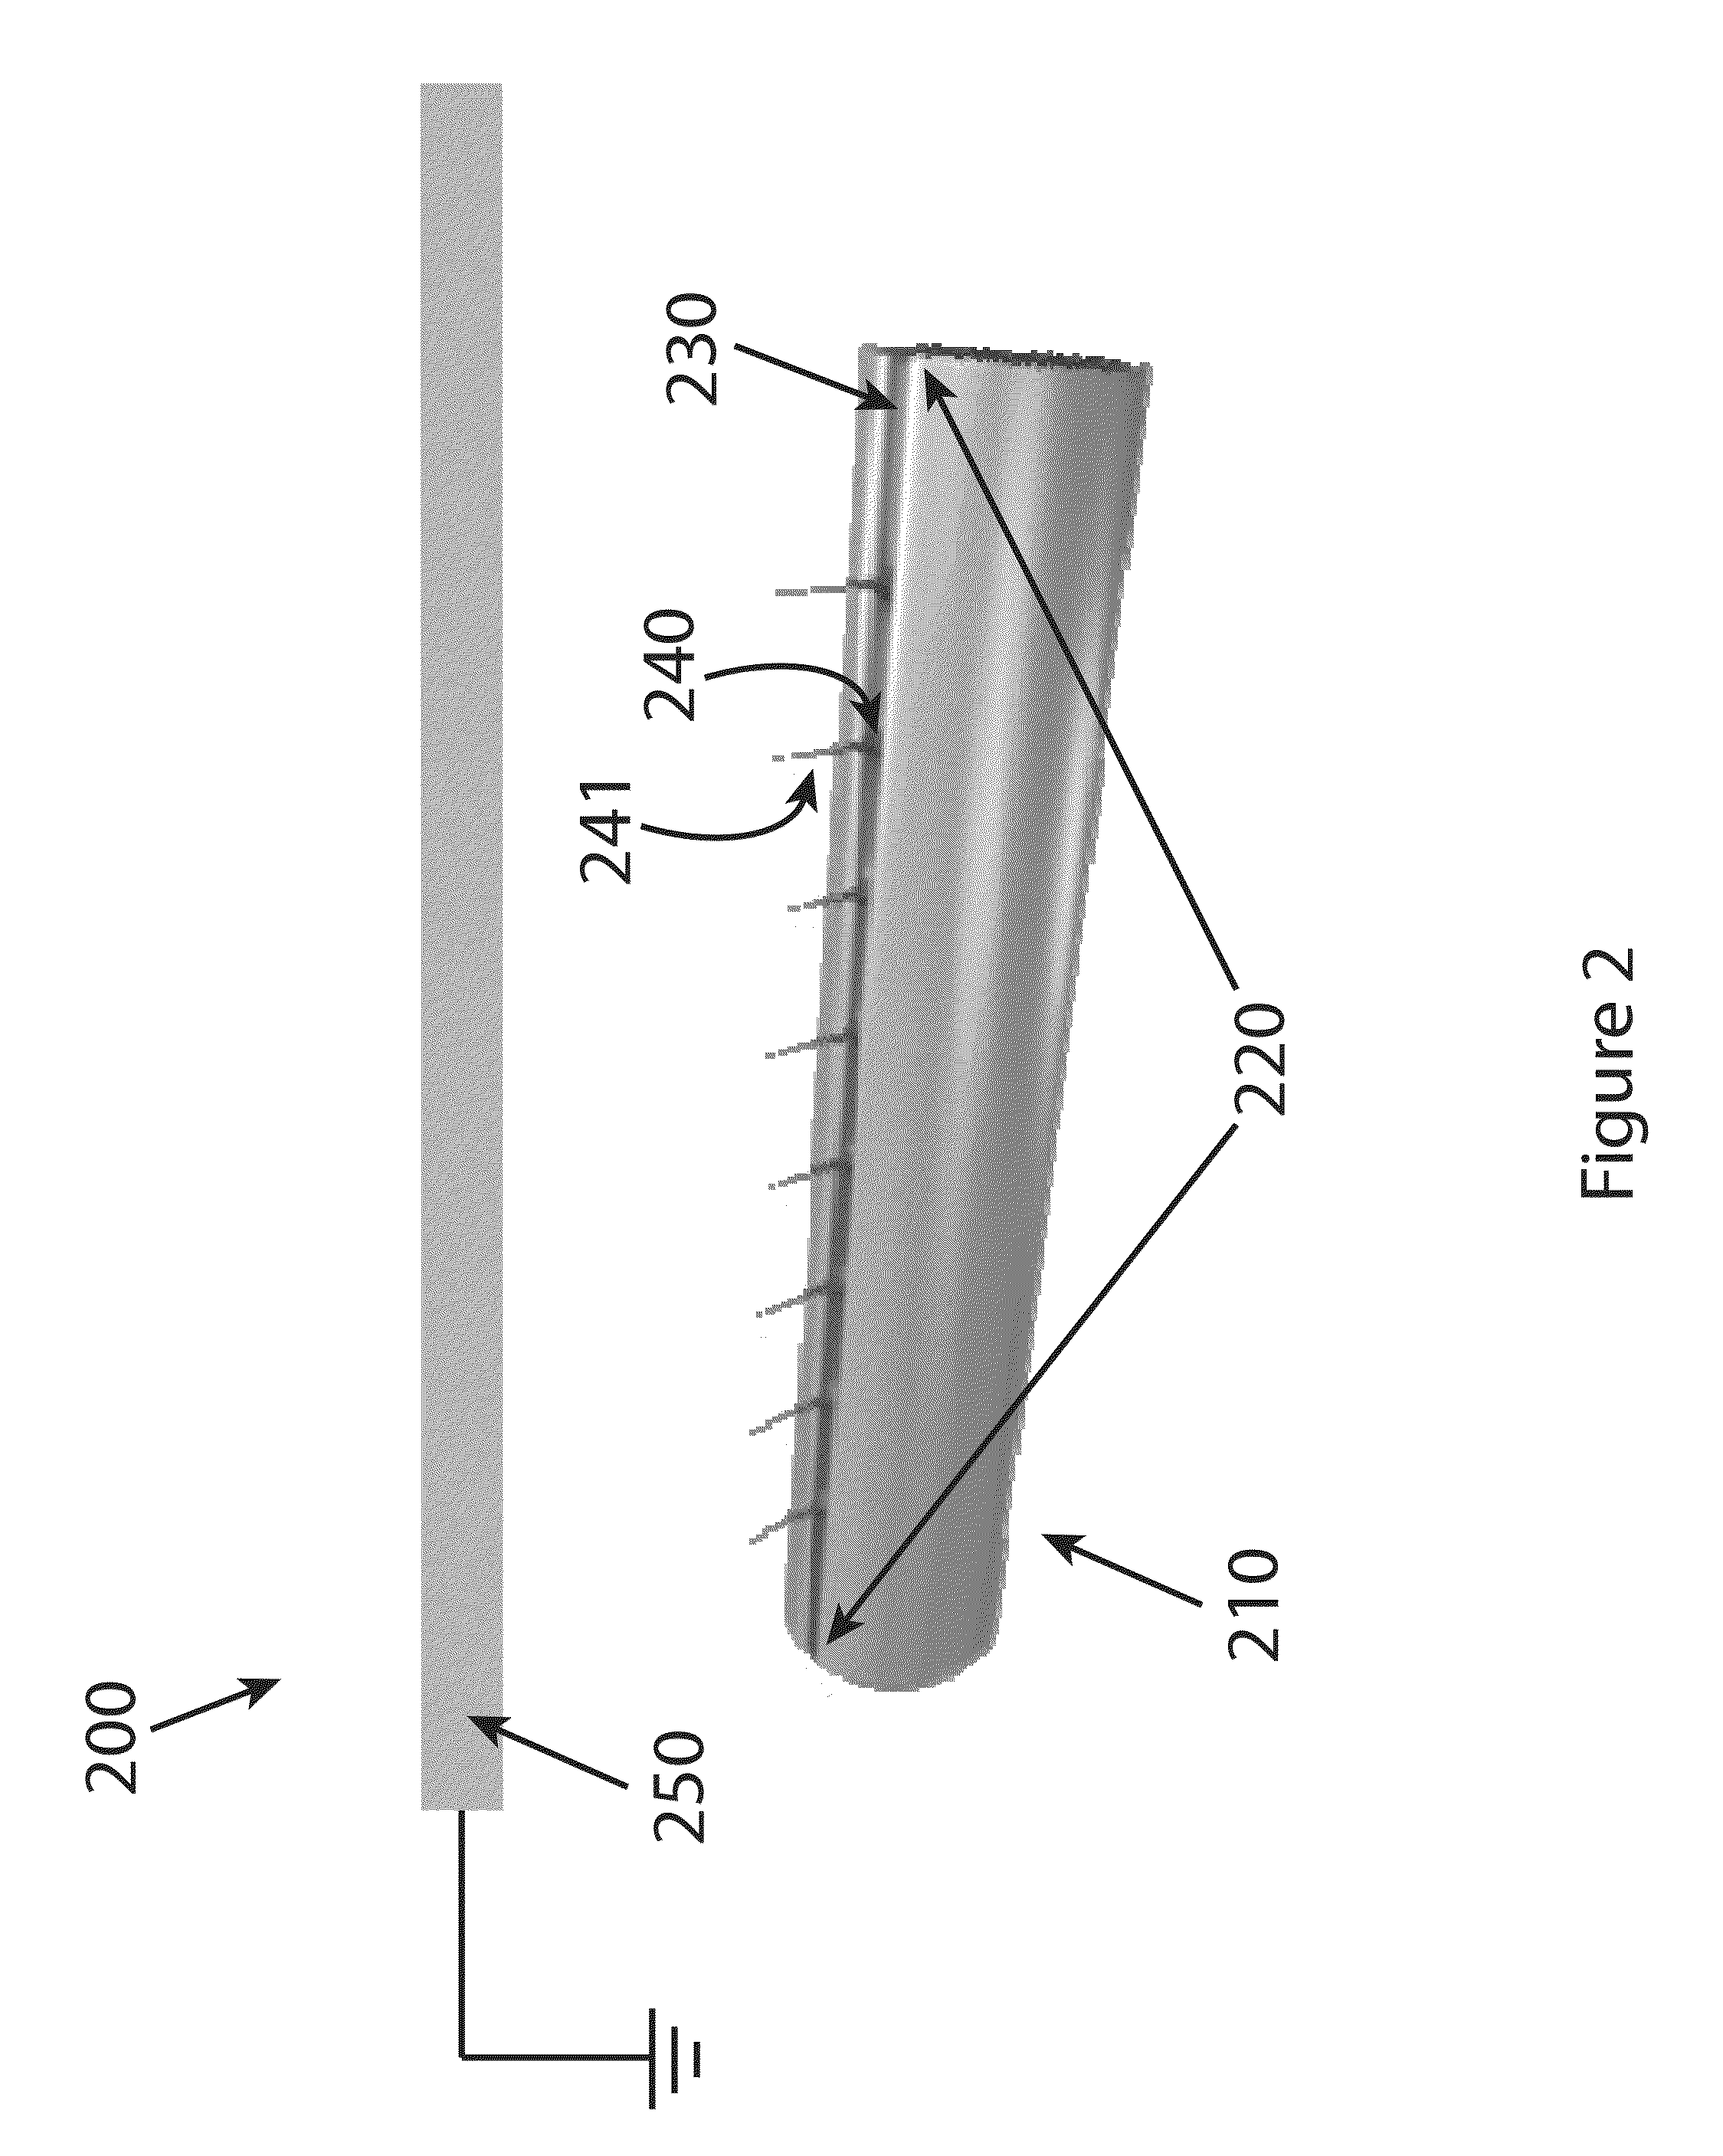 Electrospinning process for fiber manufacture